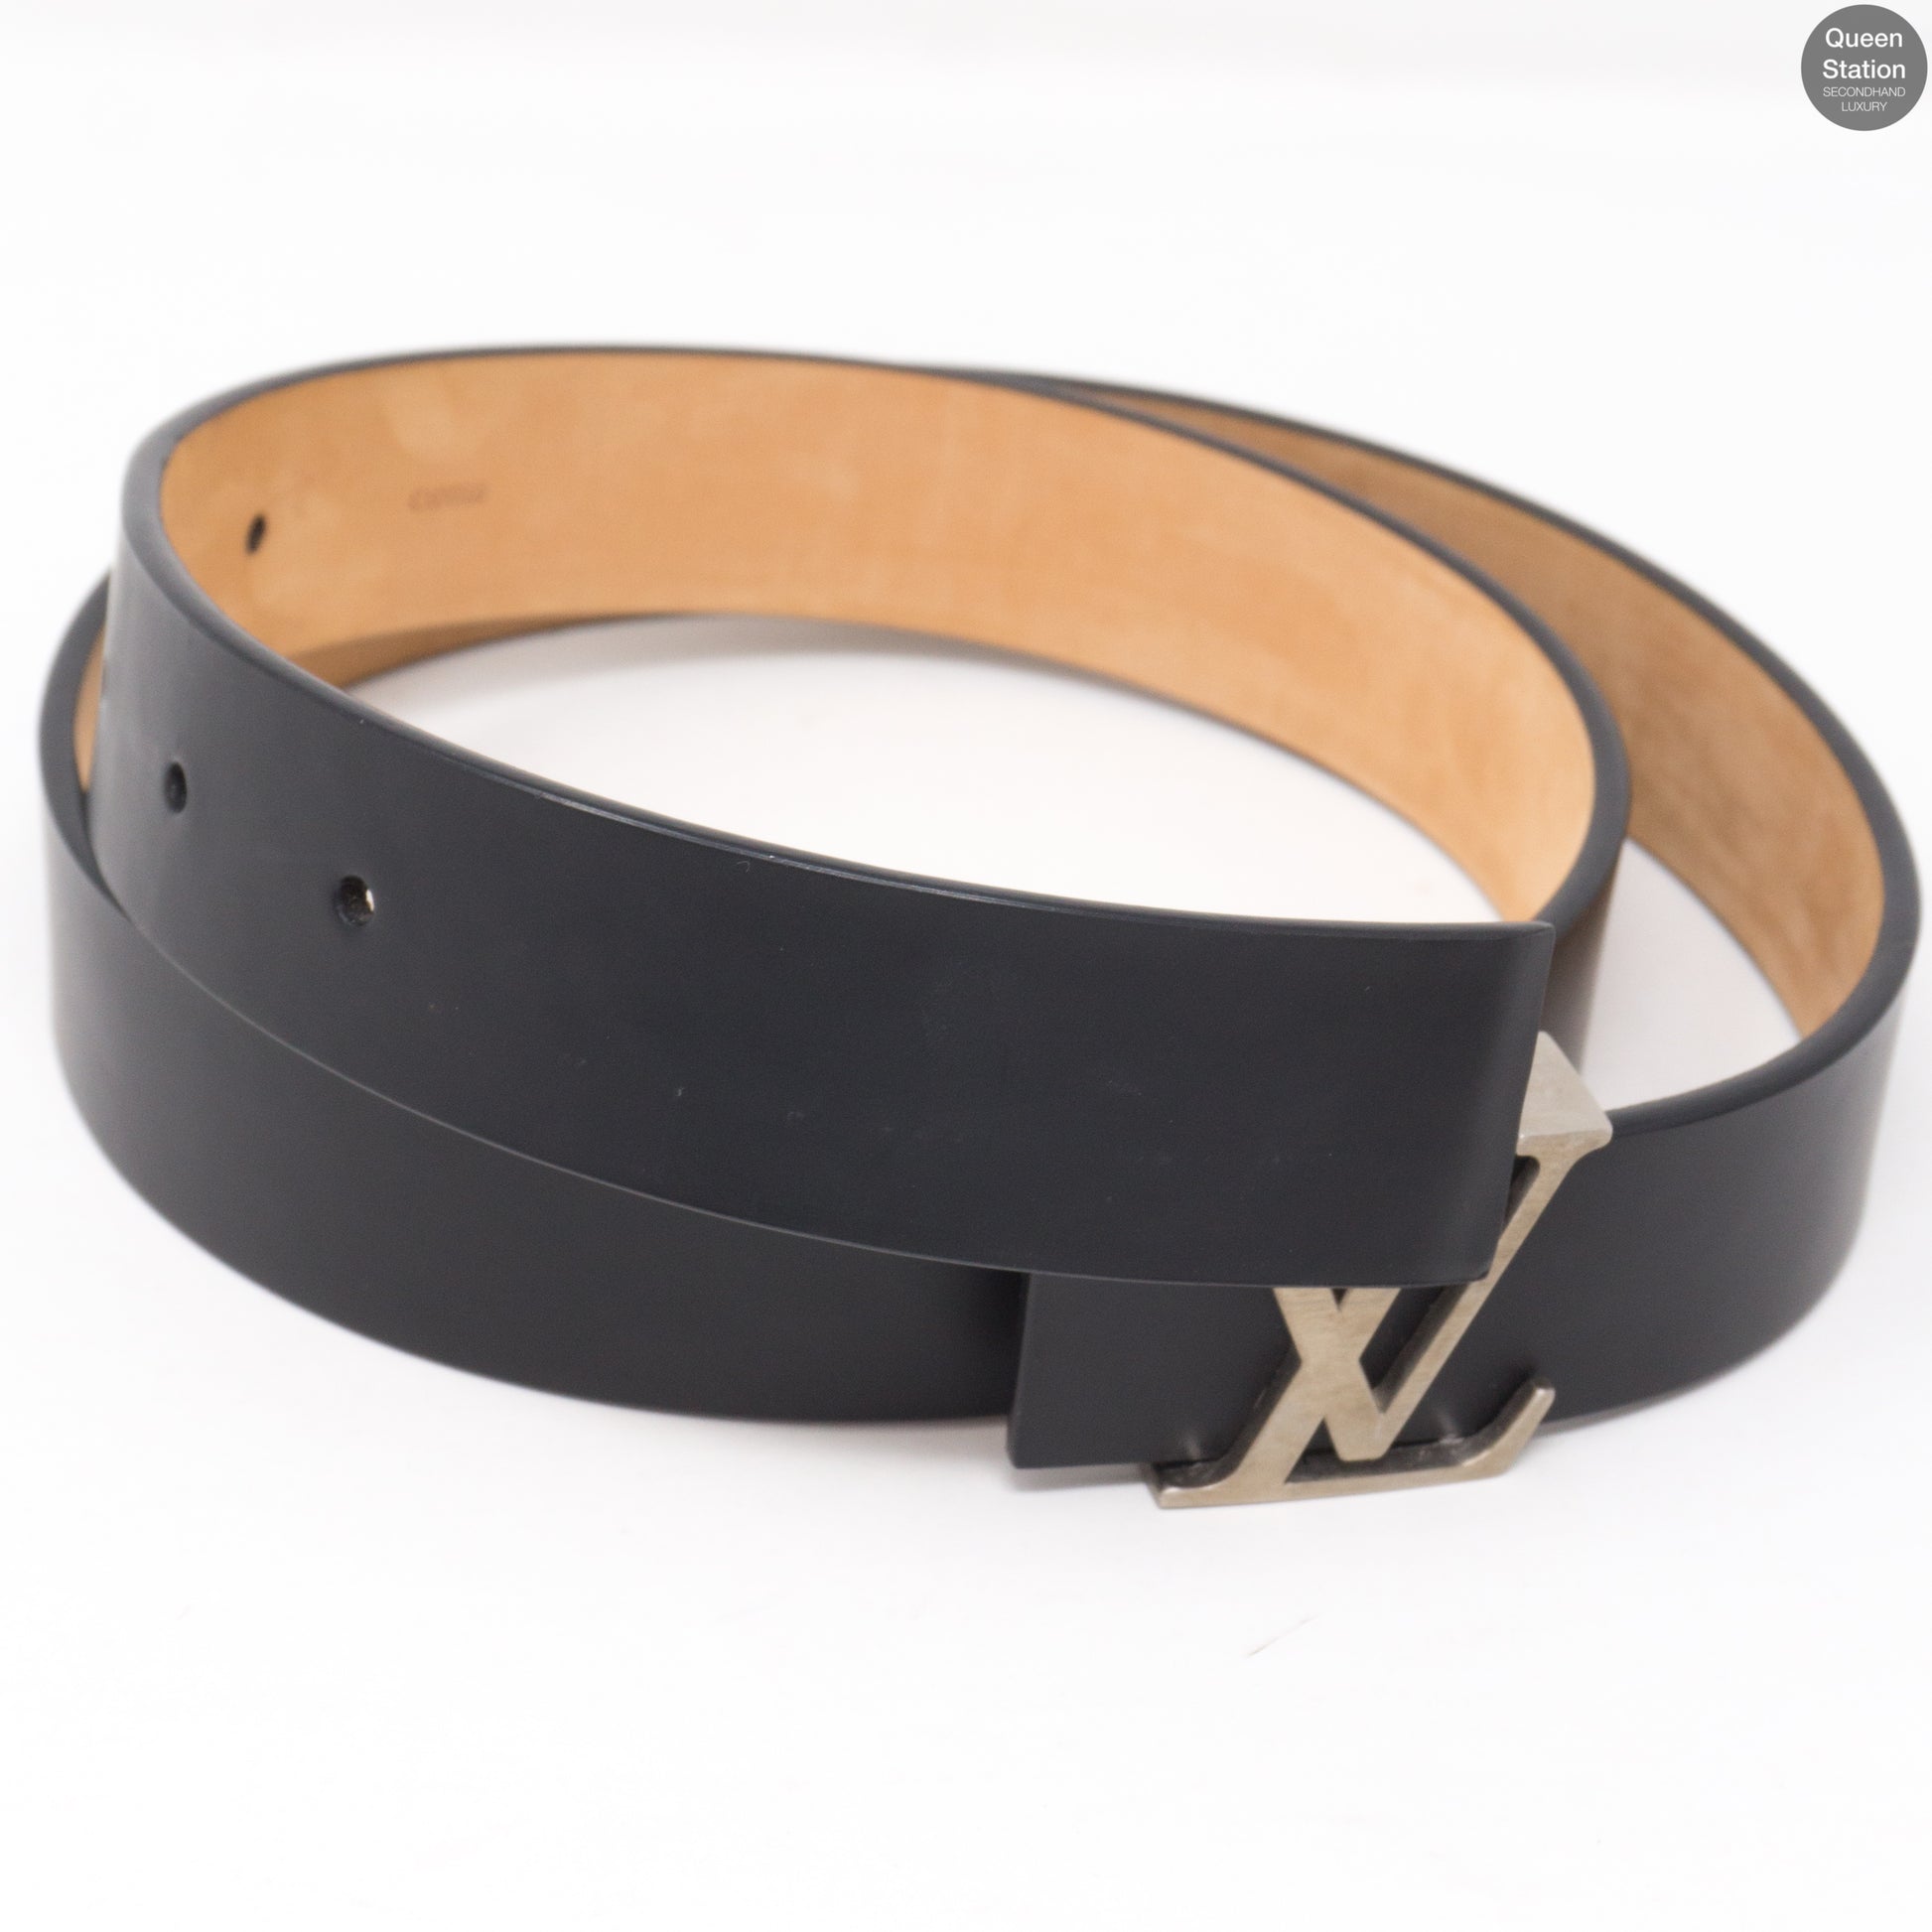 Initiales leather belt Louis Vuitton White size 85 cm in Leather - 27576327